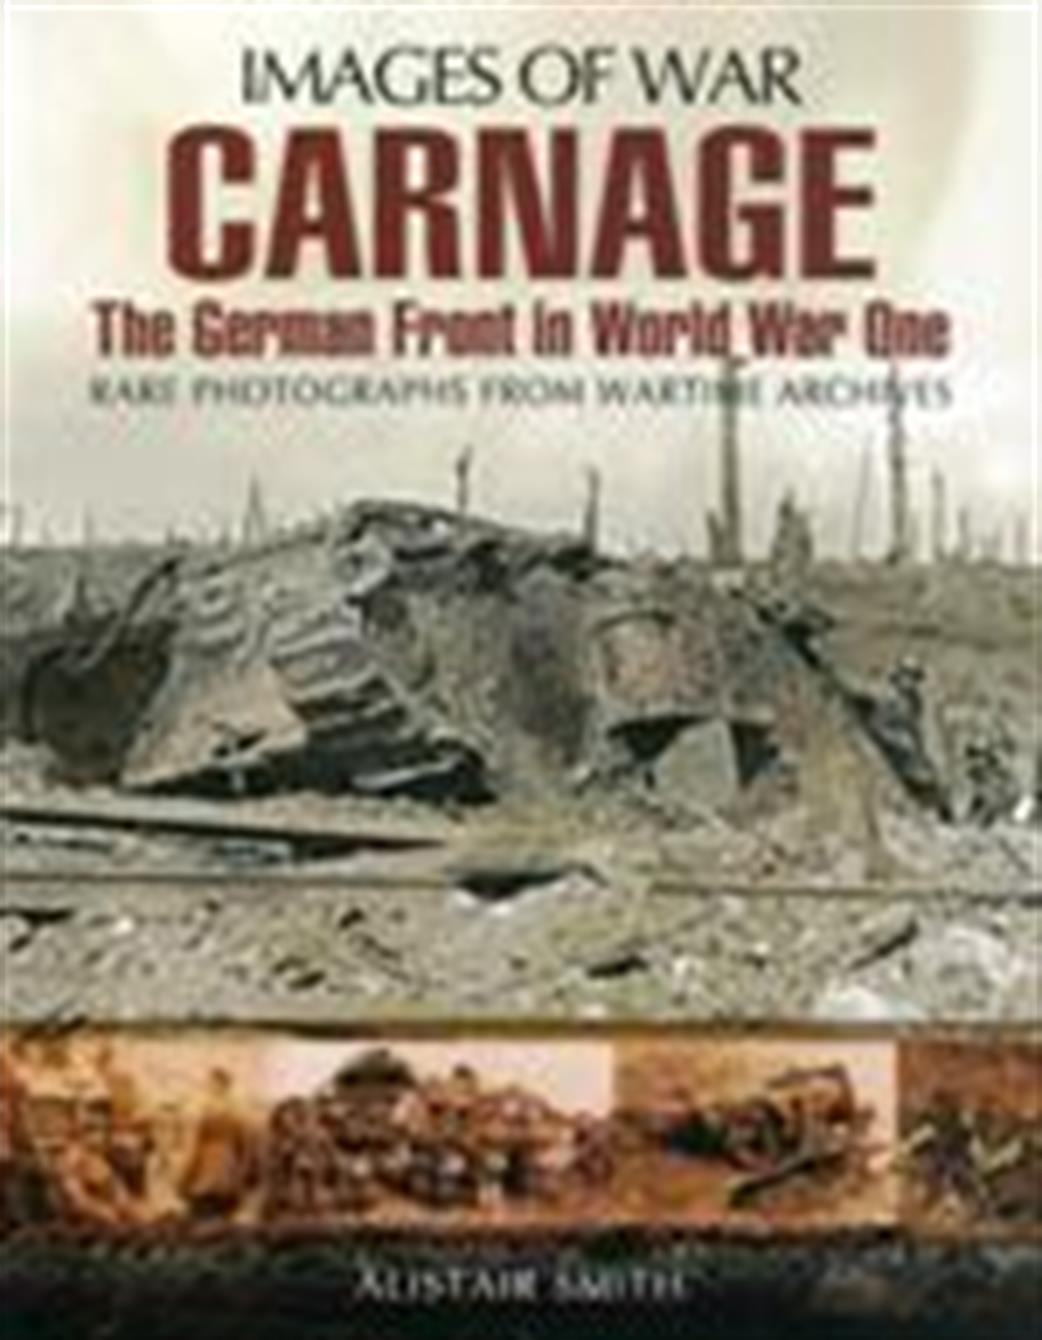 Pen & Sword  9781848846821 Images of War Carnage German Front In World War One by Alistair Smith